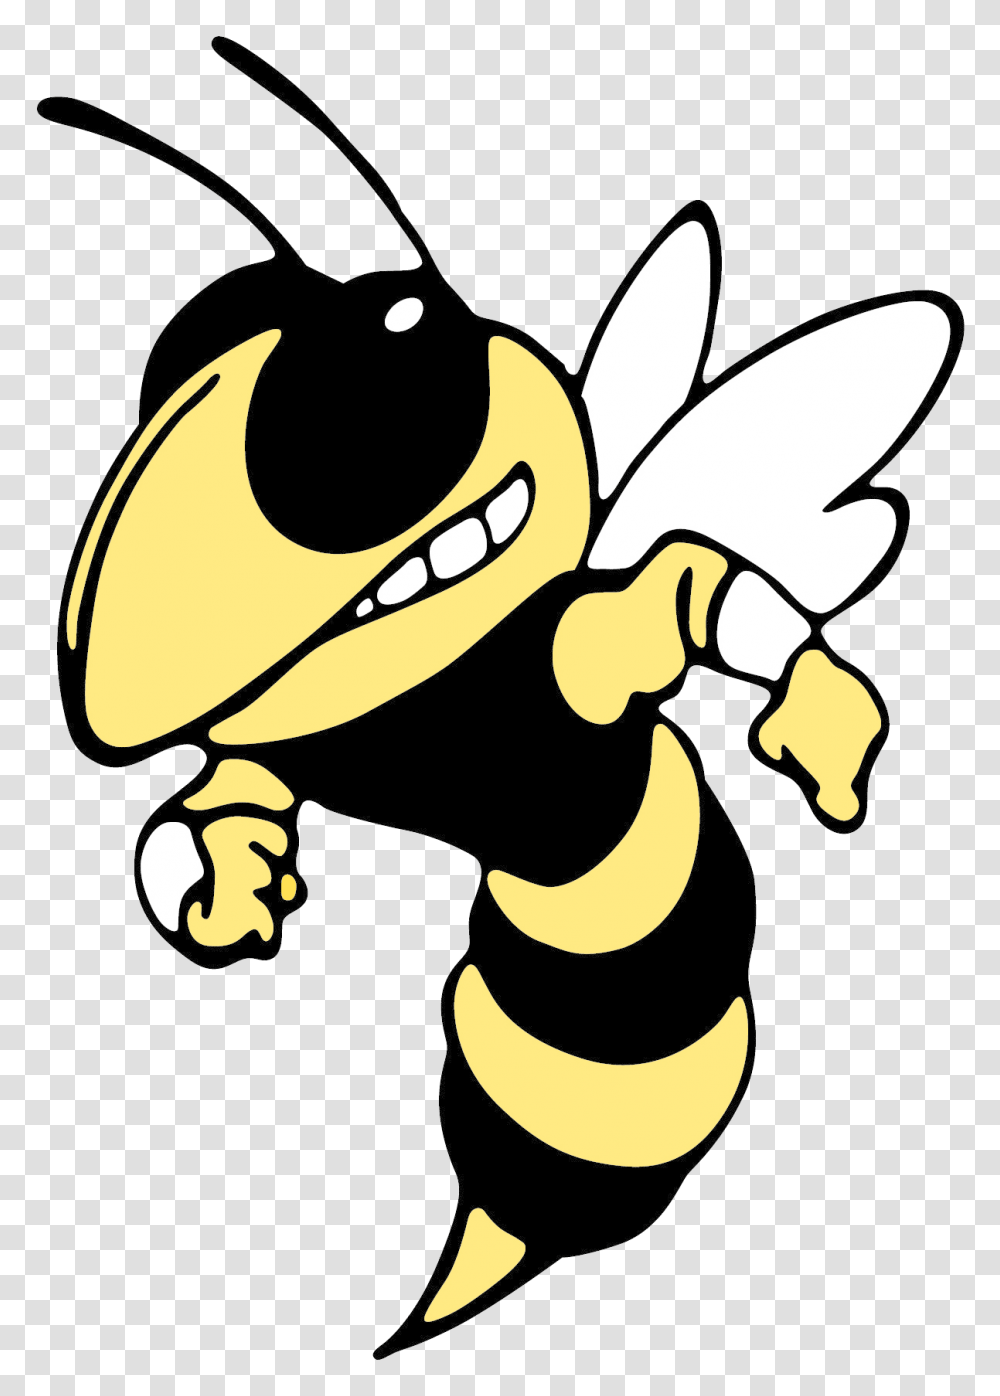 The Weaver Bearcats Defeat The Glencoe Yellow Jackets, Wasp, Bee, Insect, Invertebrate Transparent Png